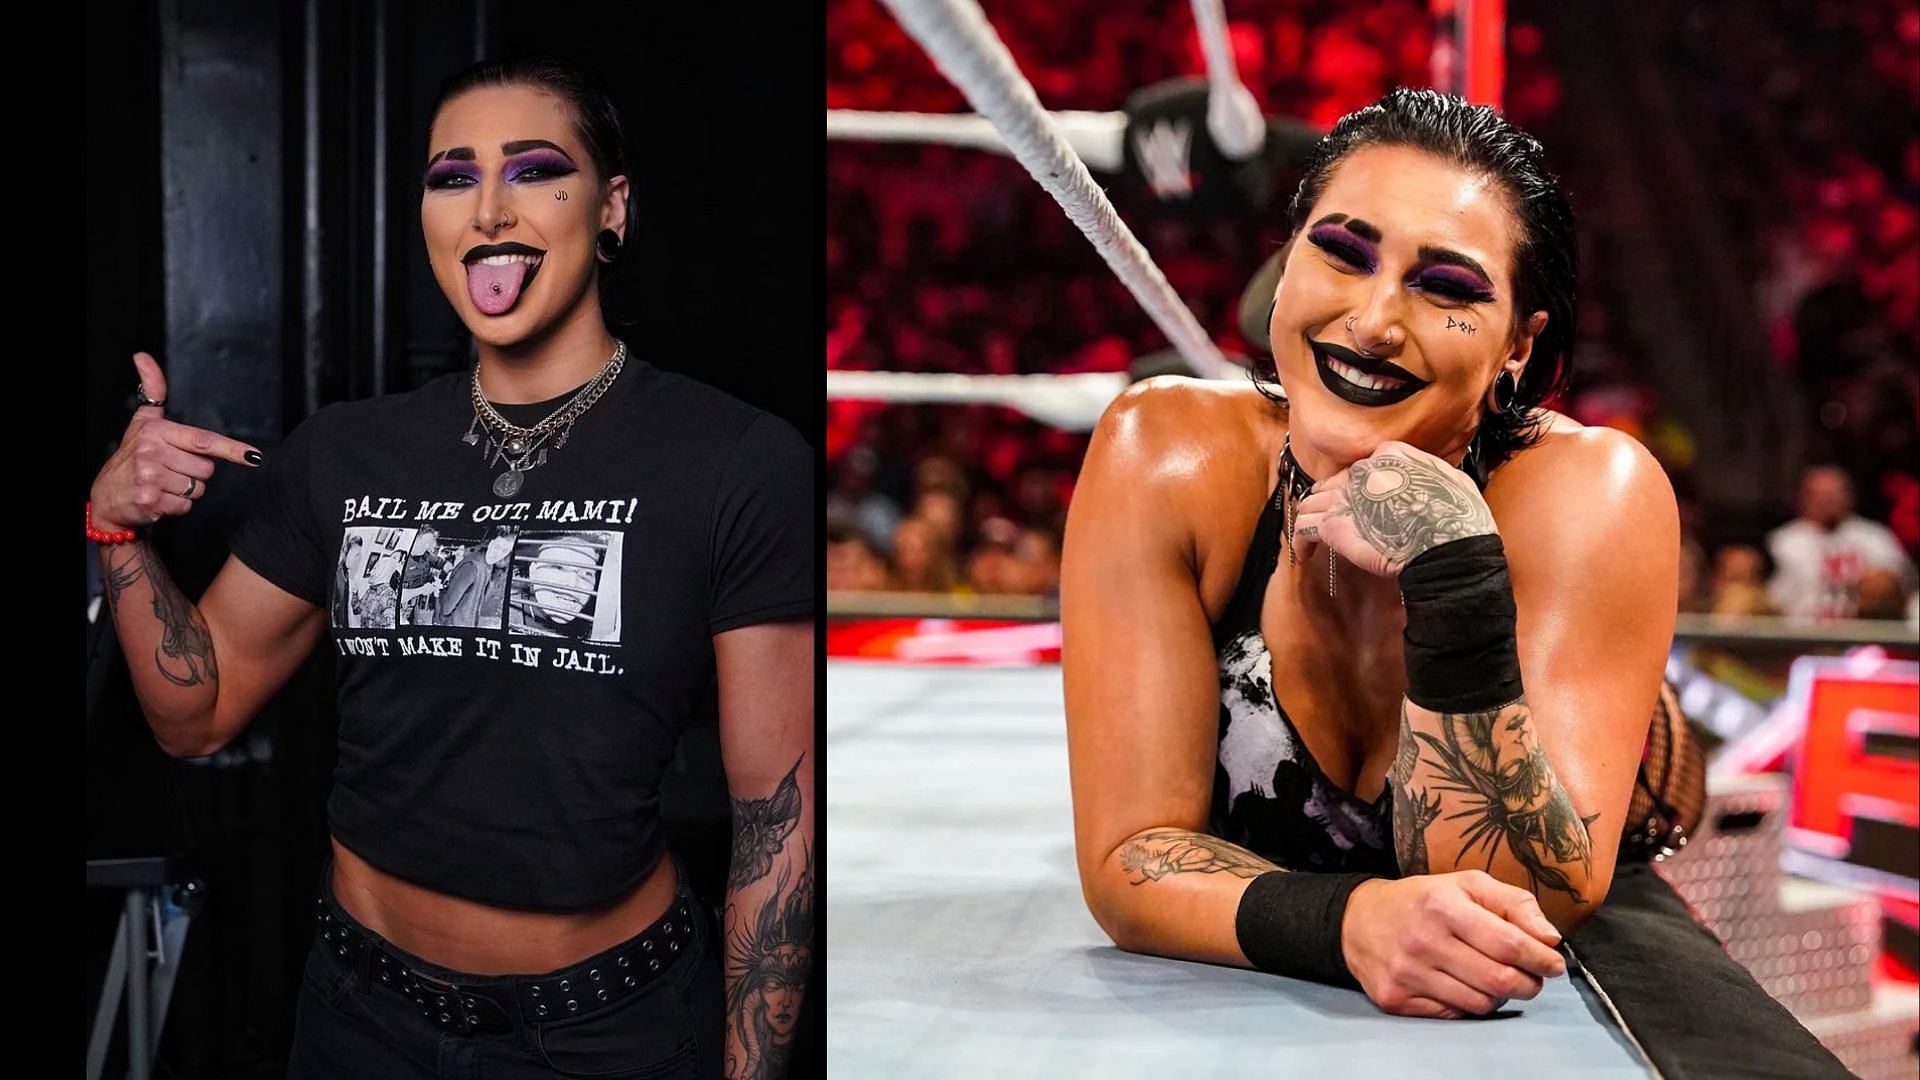 Rhea Ripley has become an integral part of WWE shows